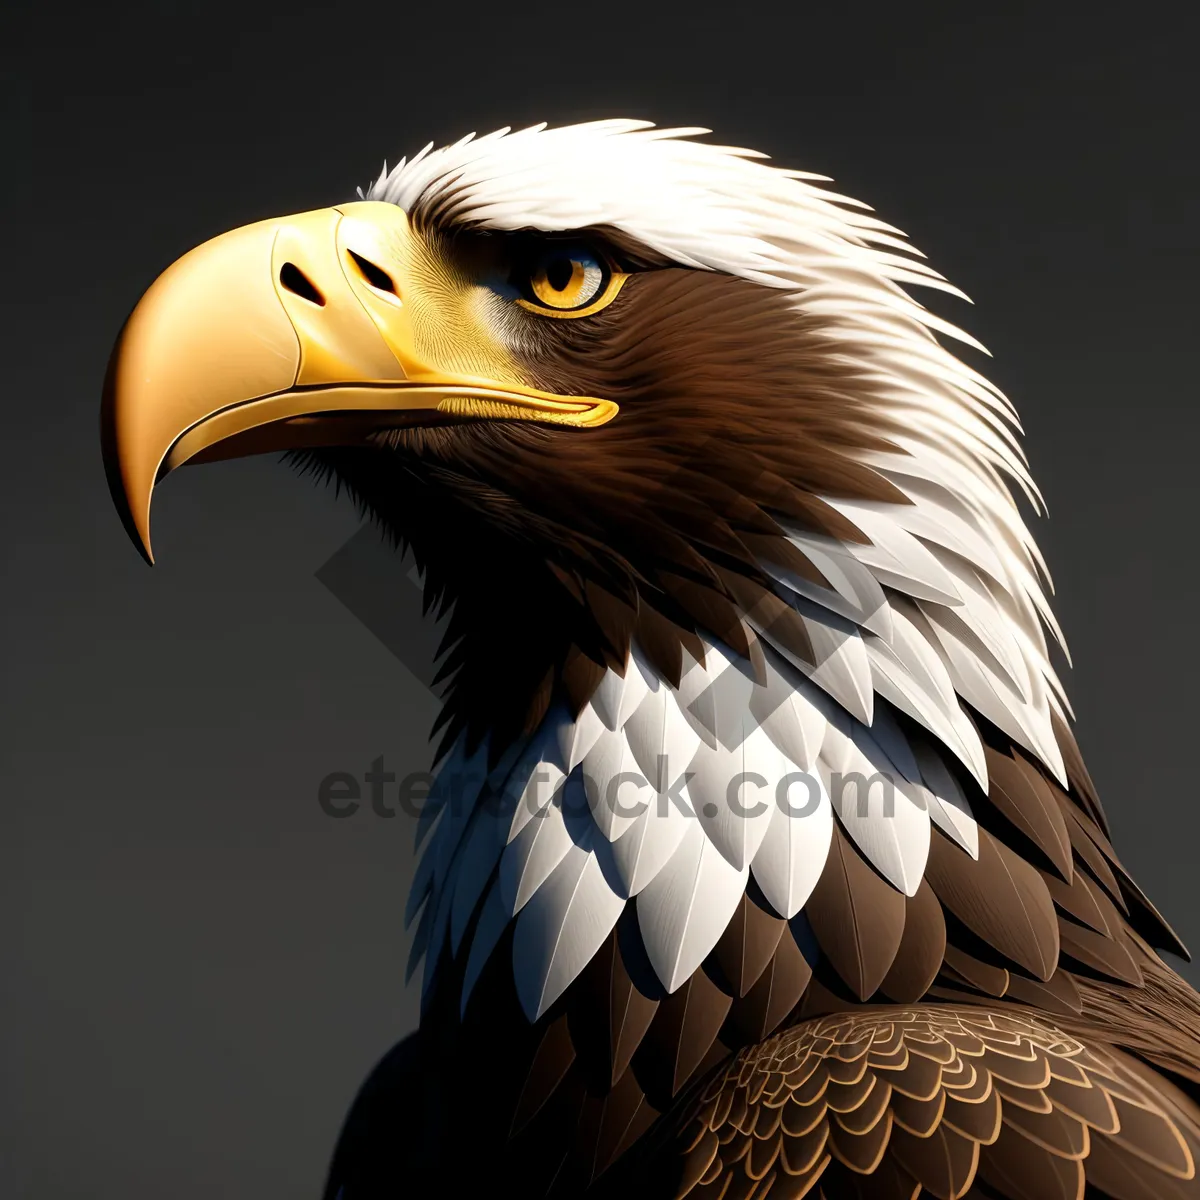 Picture of Majestic Predator: Bald Eagle with Piercing Yellow Eye